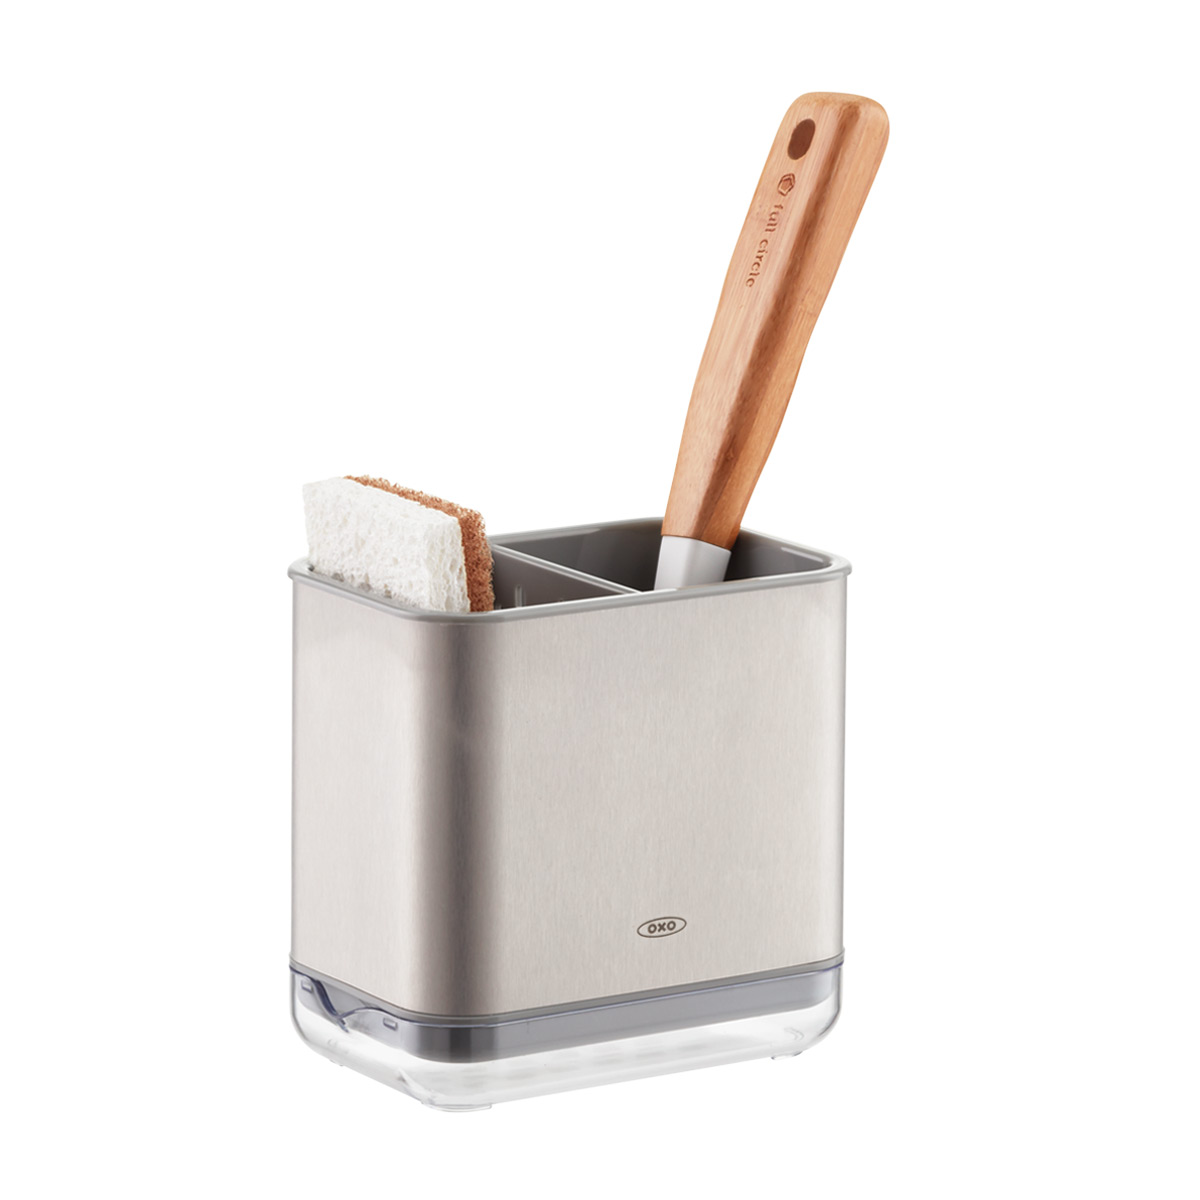 https://www.containerstore.com/catalogimages/324827/10071756-sink-caddy-stainless-steel.jpg